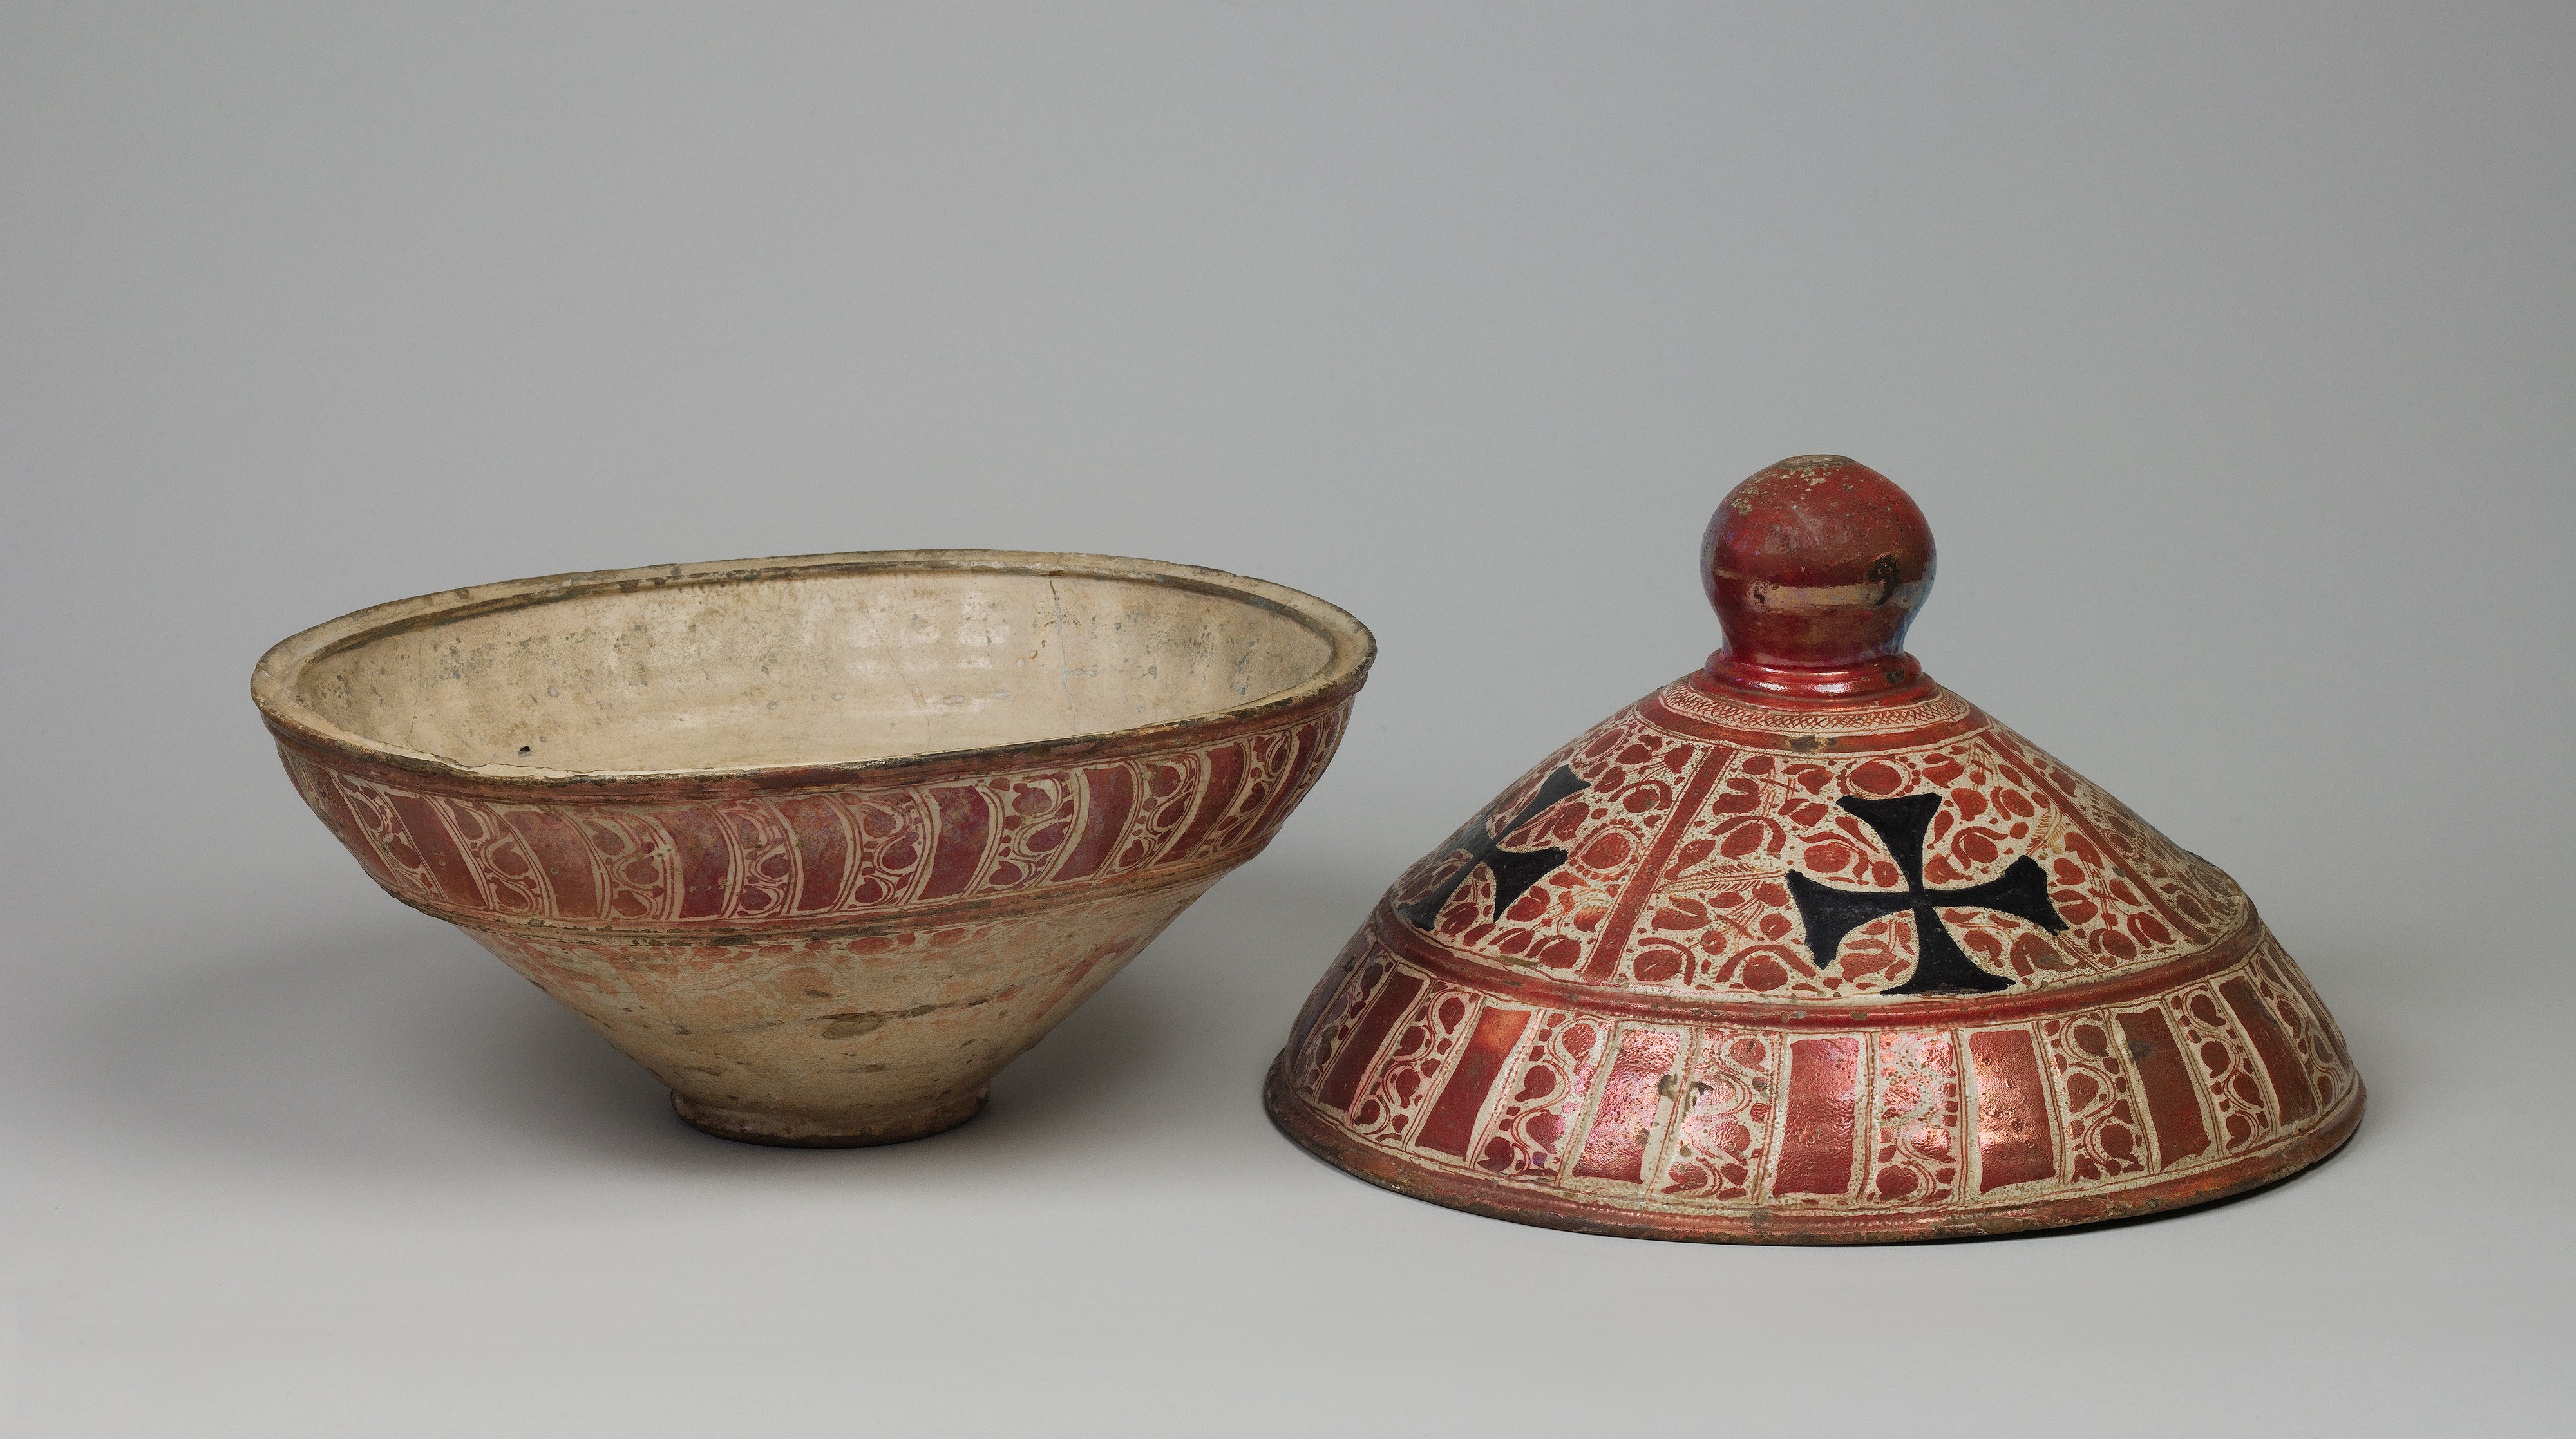 Bowl with Cover third quarter 16th century Spanish The form of this deep,  covered bowl is similar to the tagines famously used in North African  cuisine today. Cooking pots of that type